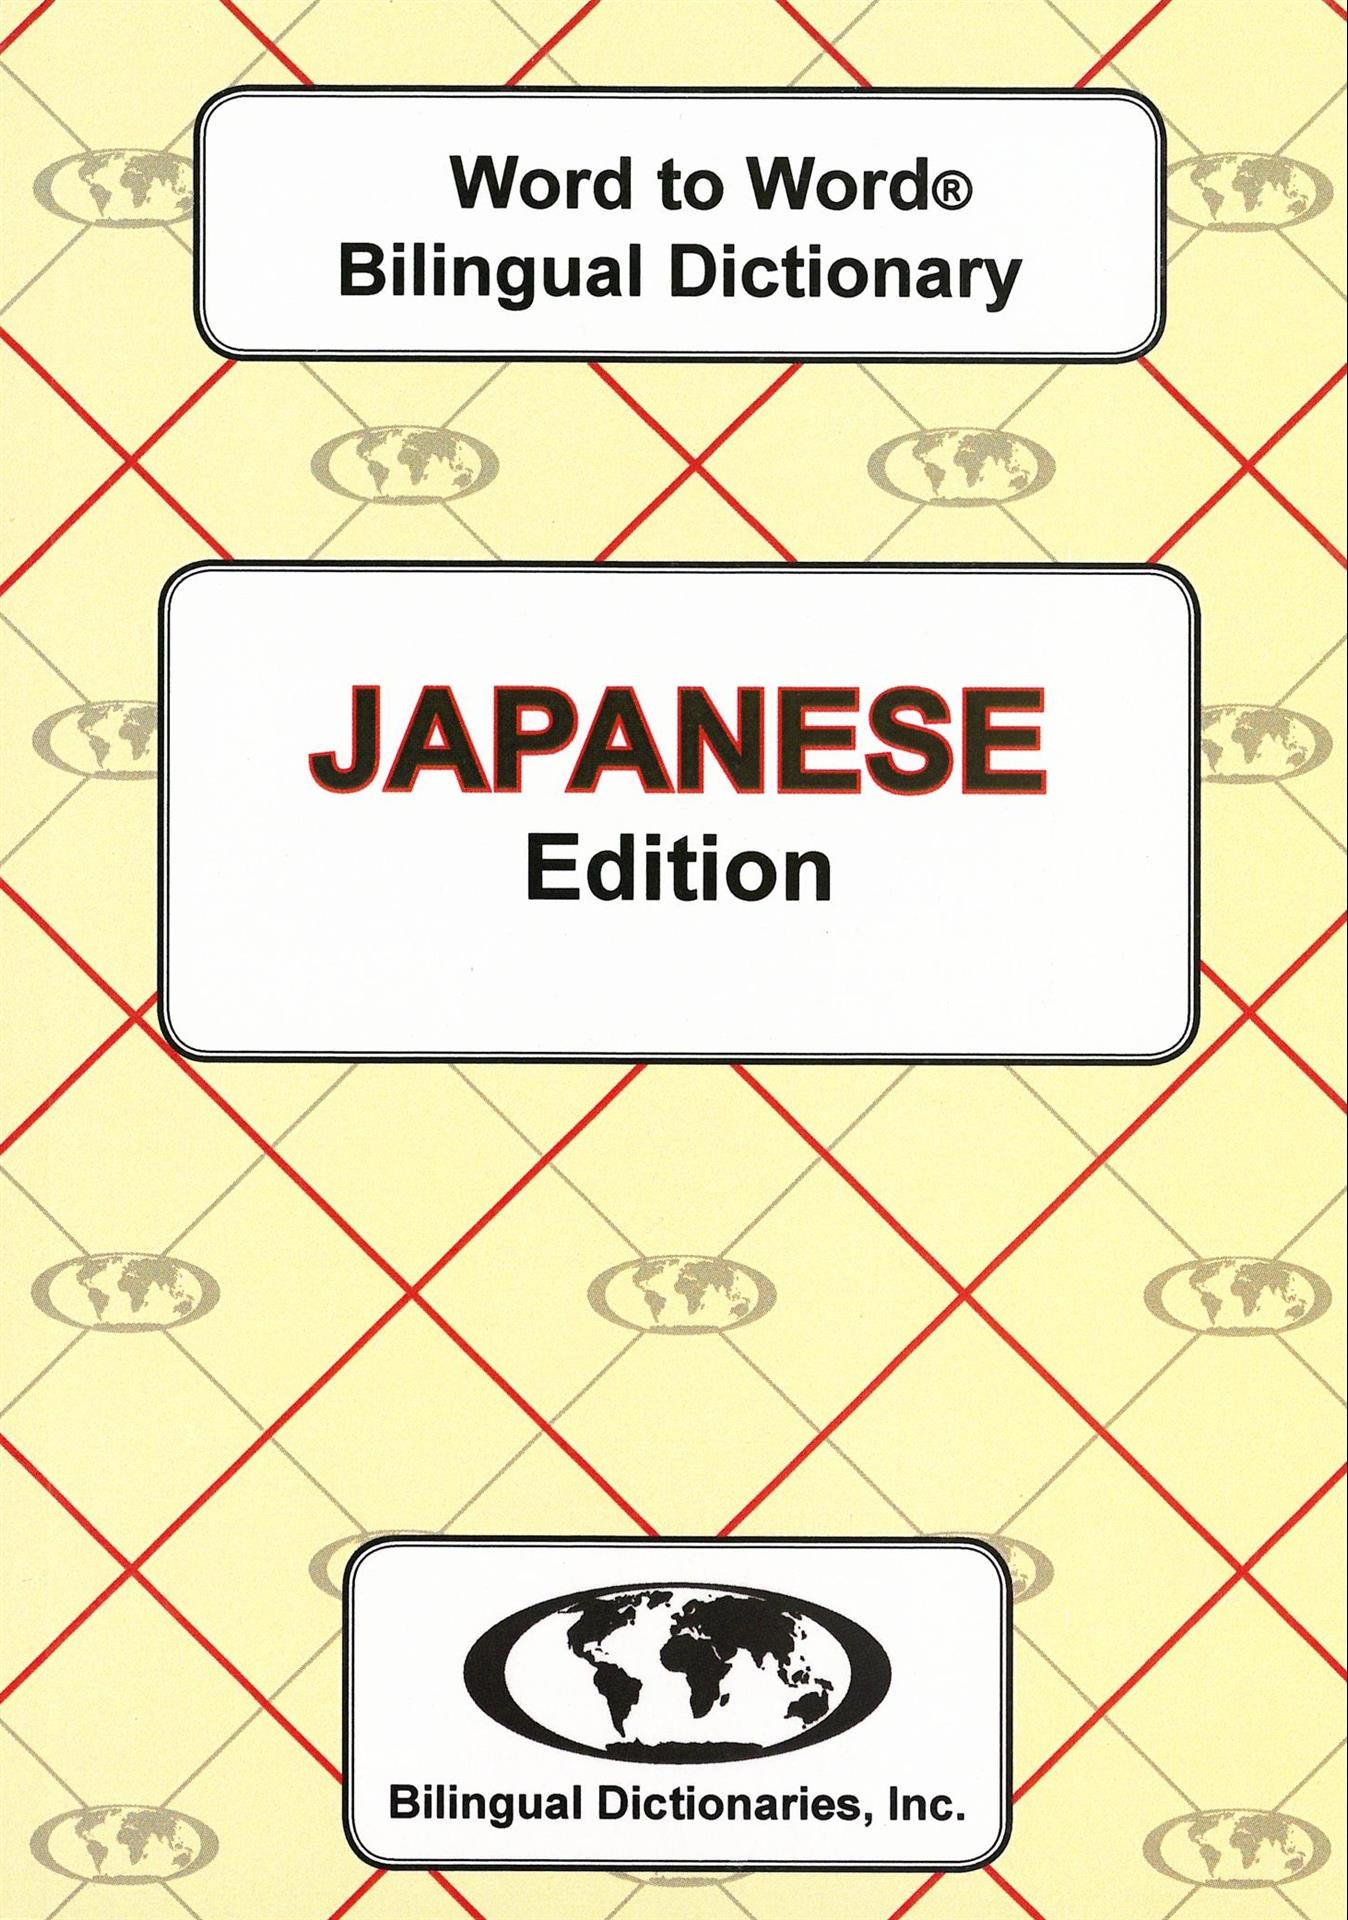 JAPANESE Word to Word Bilingual Dictionary